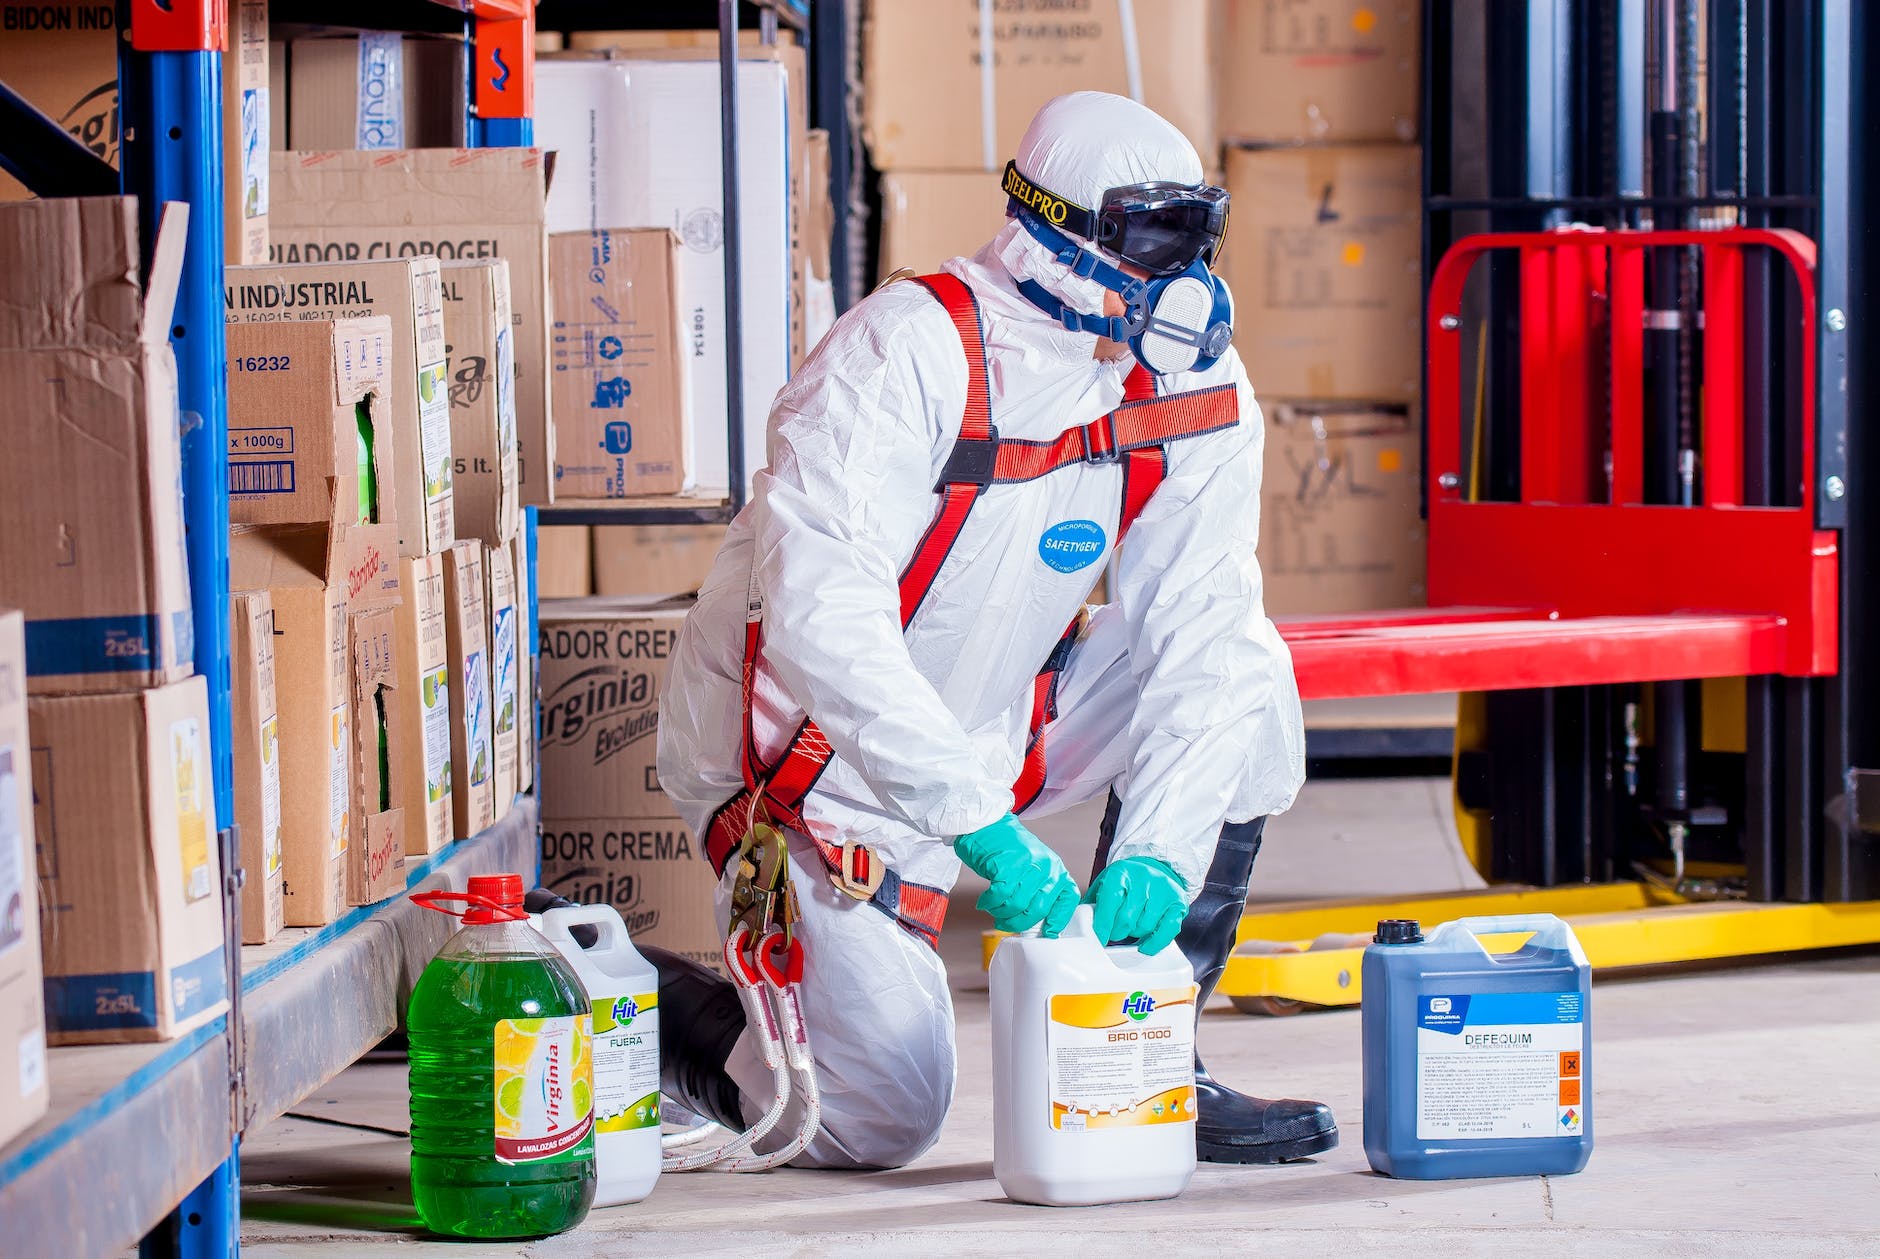 Chemical Handling: Storage and Personal Protective Equipment (PPE)